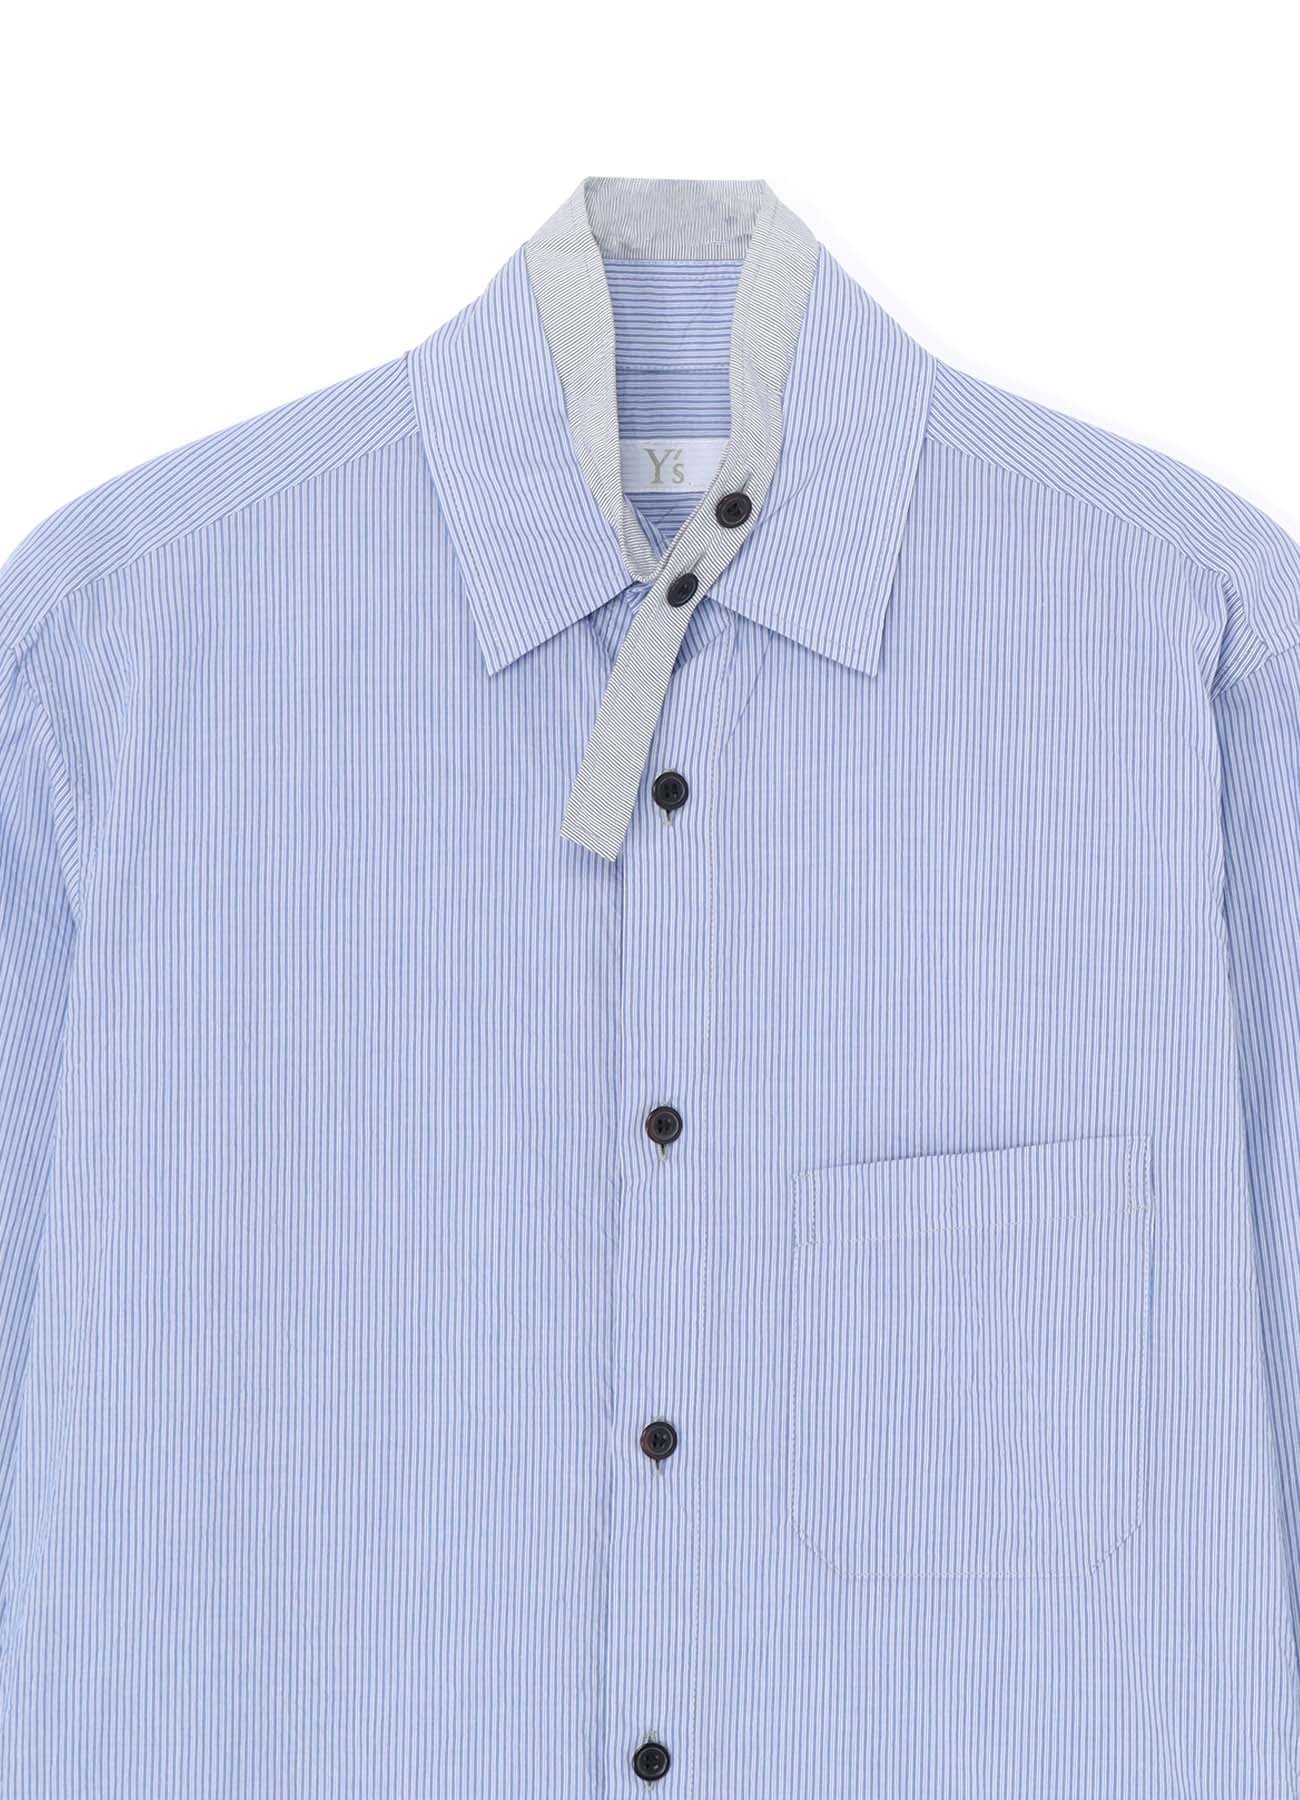 WRINKLED STRIPED COTTON DOUBLE COLLAR SHIRT(S Blue): Vintage 1.1 